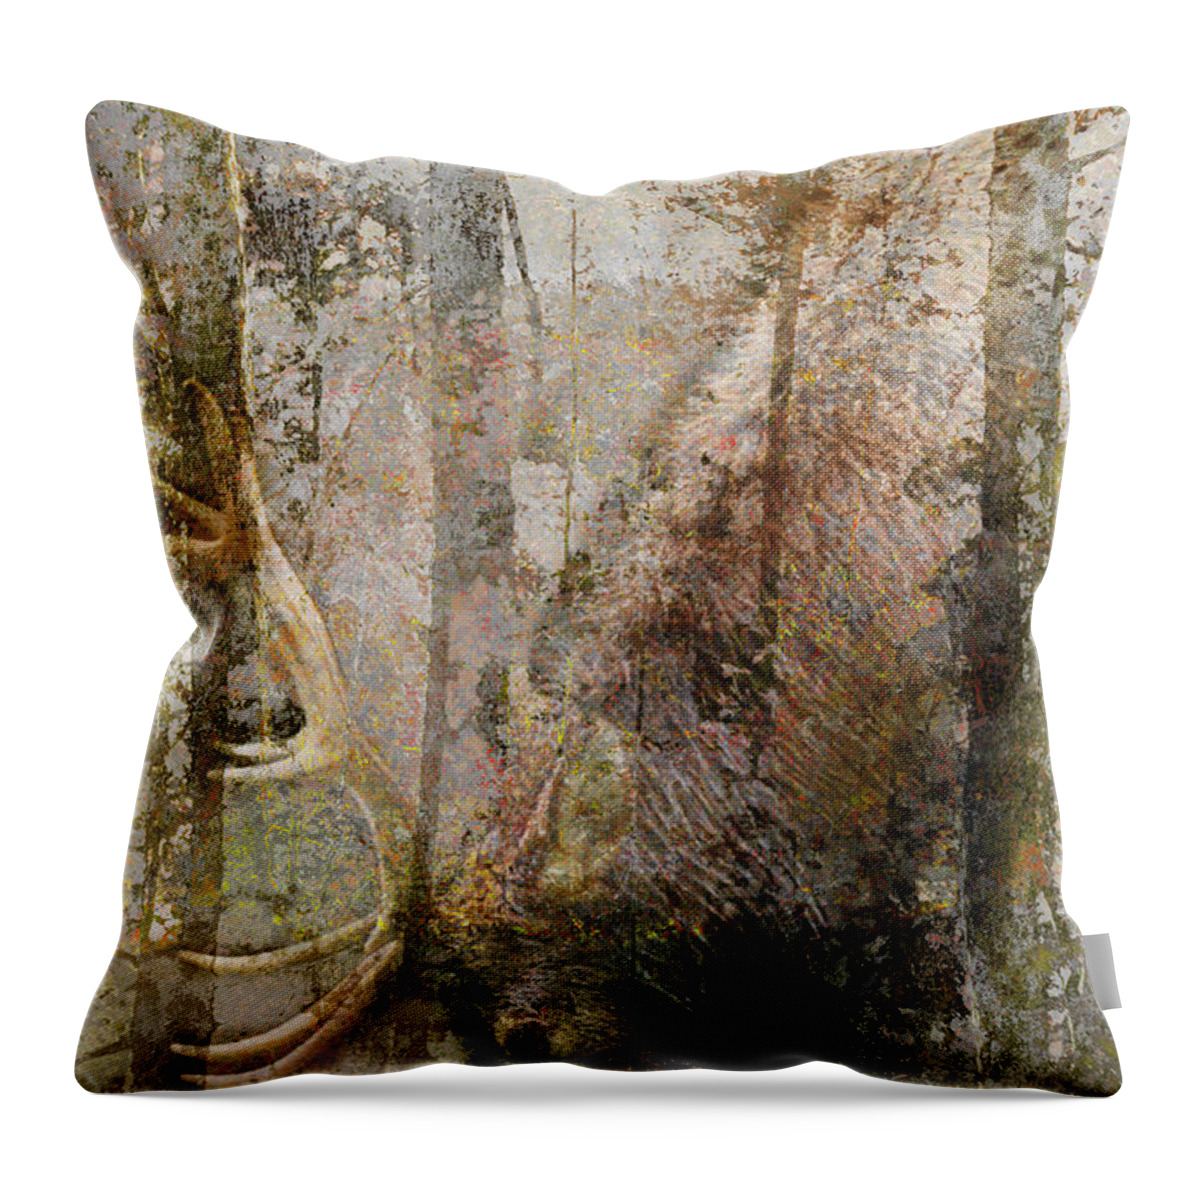 Elk Bull Throw Pillow featuring the photograph Elk Bull Grazing by Suzanne Powers